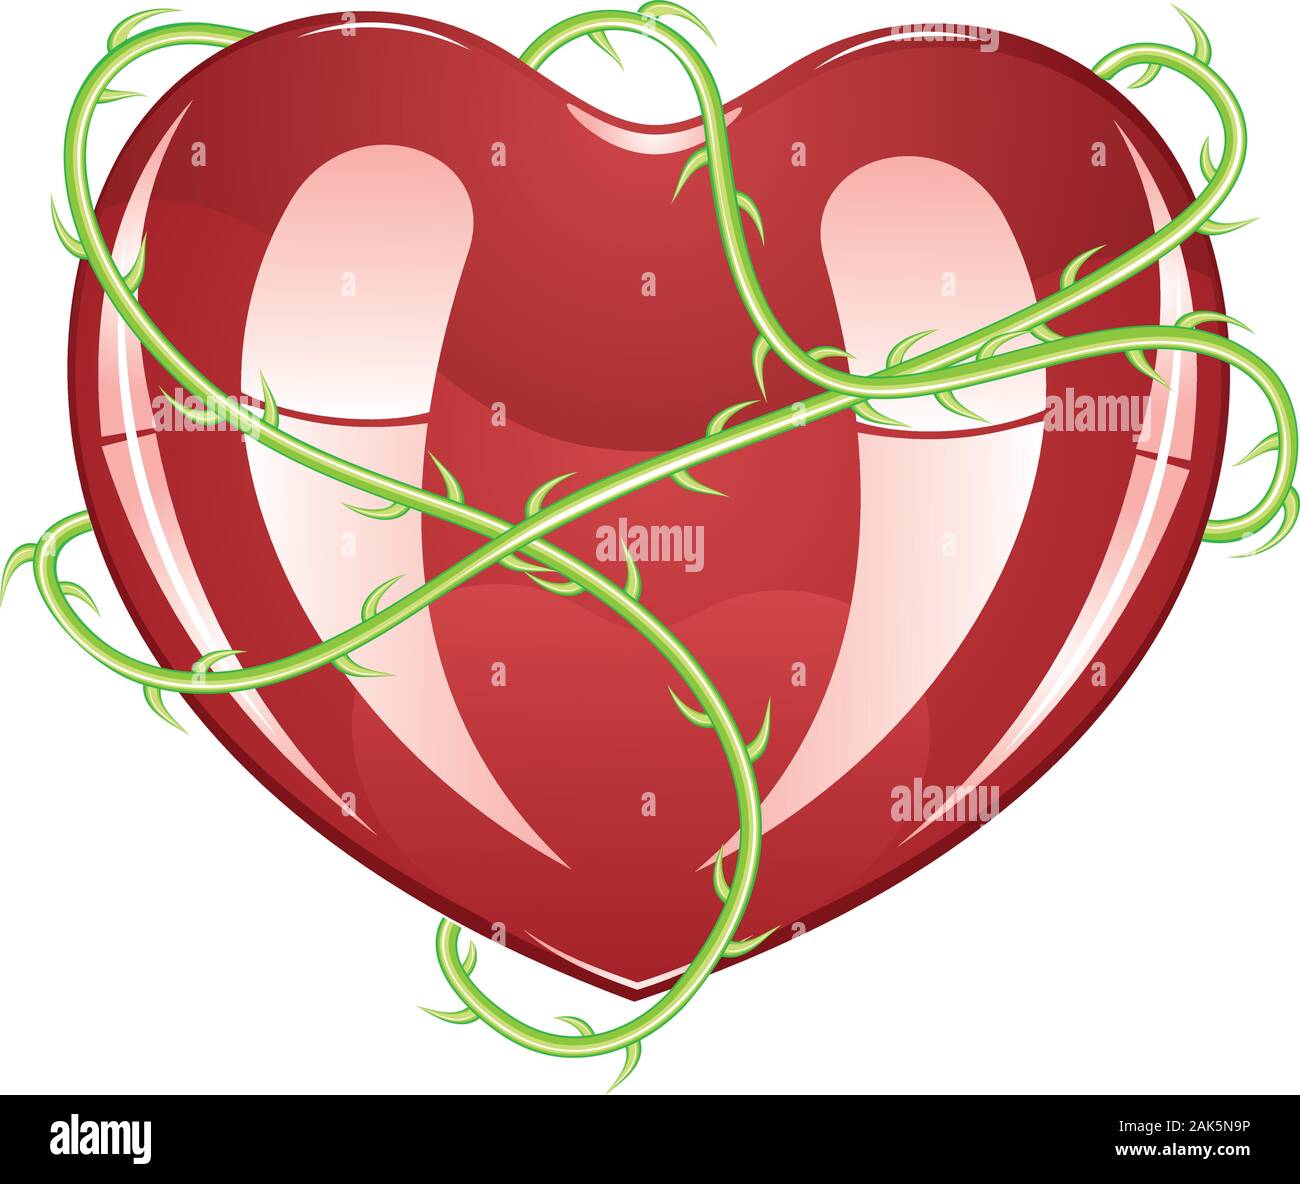 Red glossy heart icon with green rose thorns on white background. Stock Vector